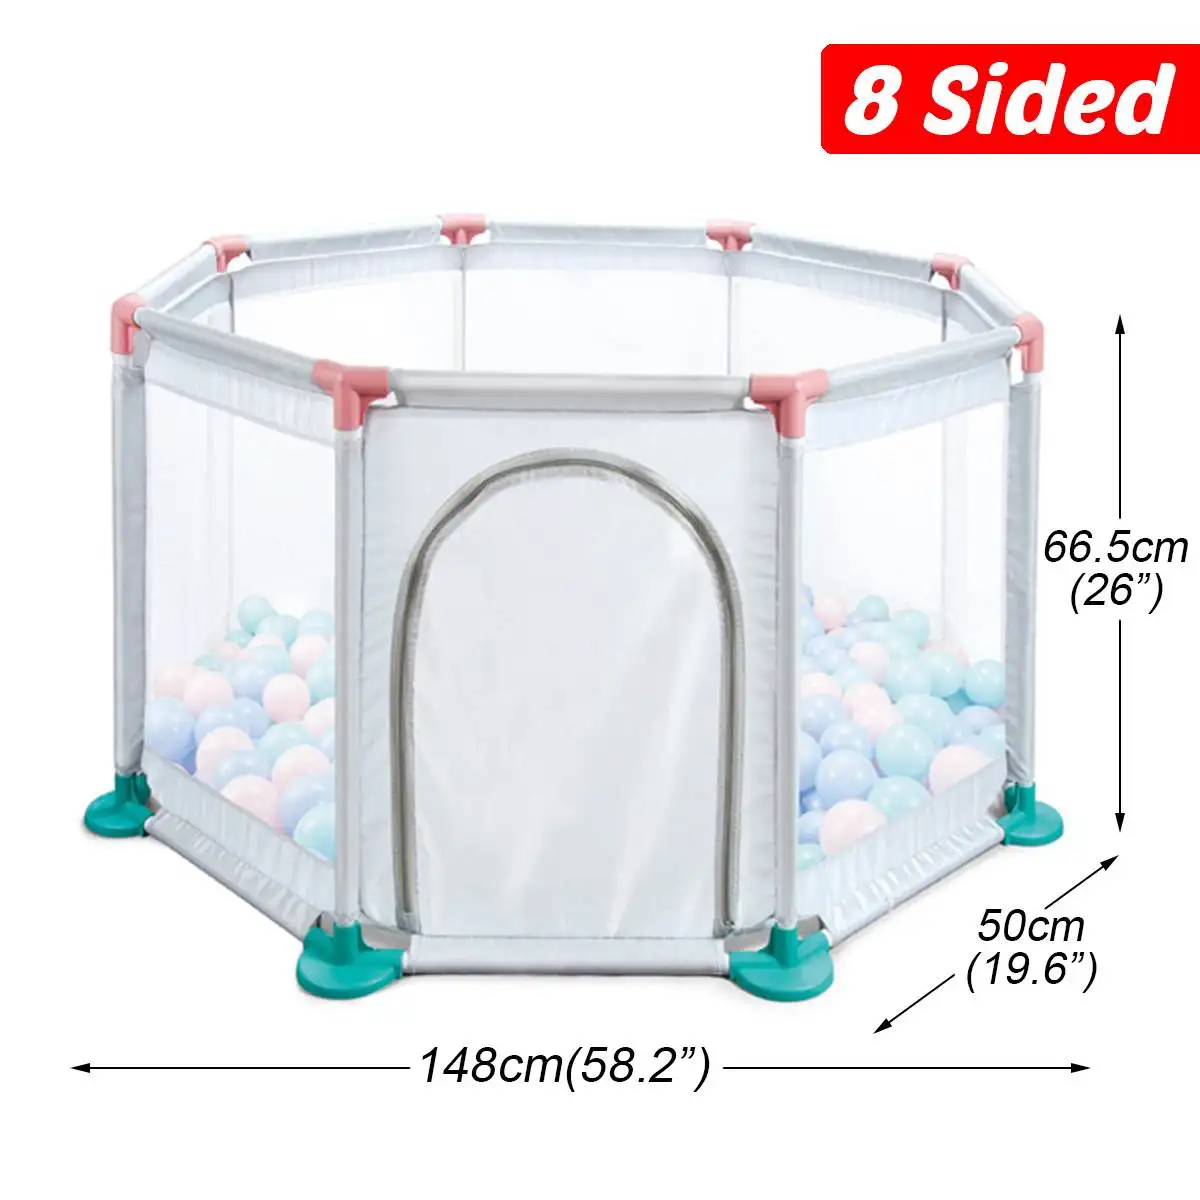 Baby Furniture Playpen For Children Large Dry Pool Baby Playpen Safety Indoor Barriers Home Playground Park For 0-6 Old SALE images - 6